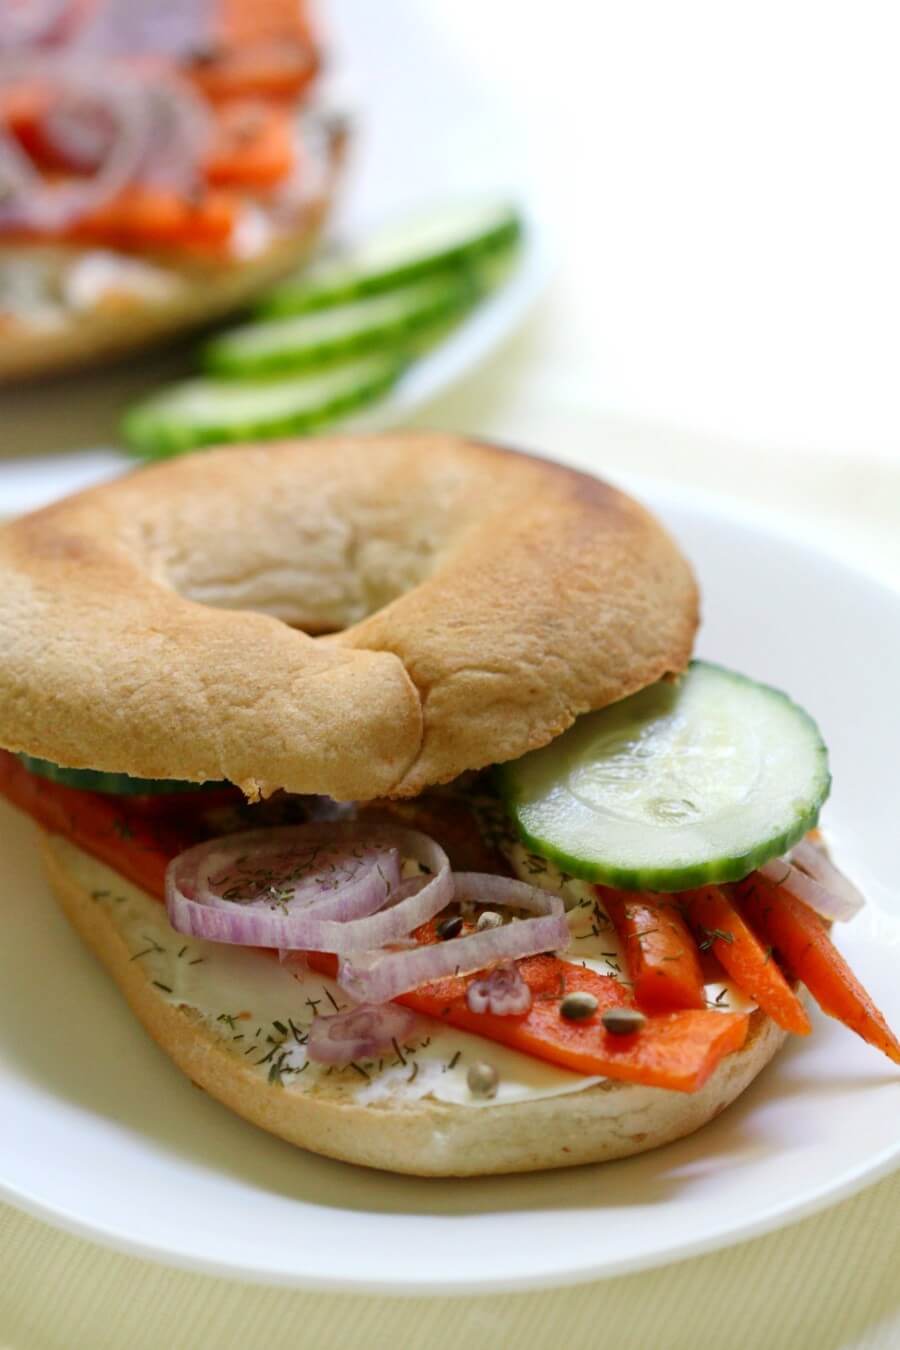 bagel and vegan lox with vegetable toppings